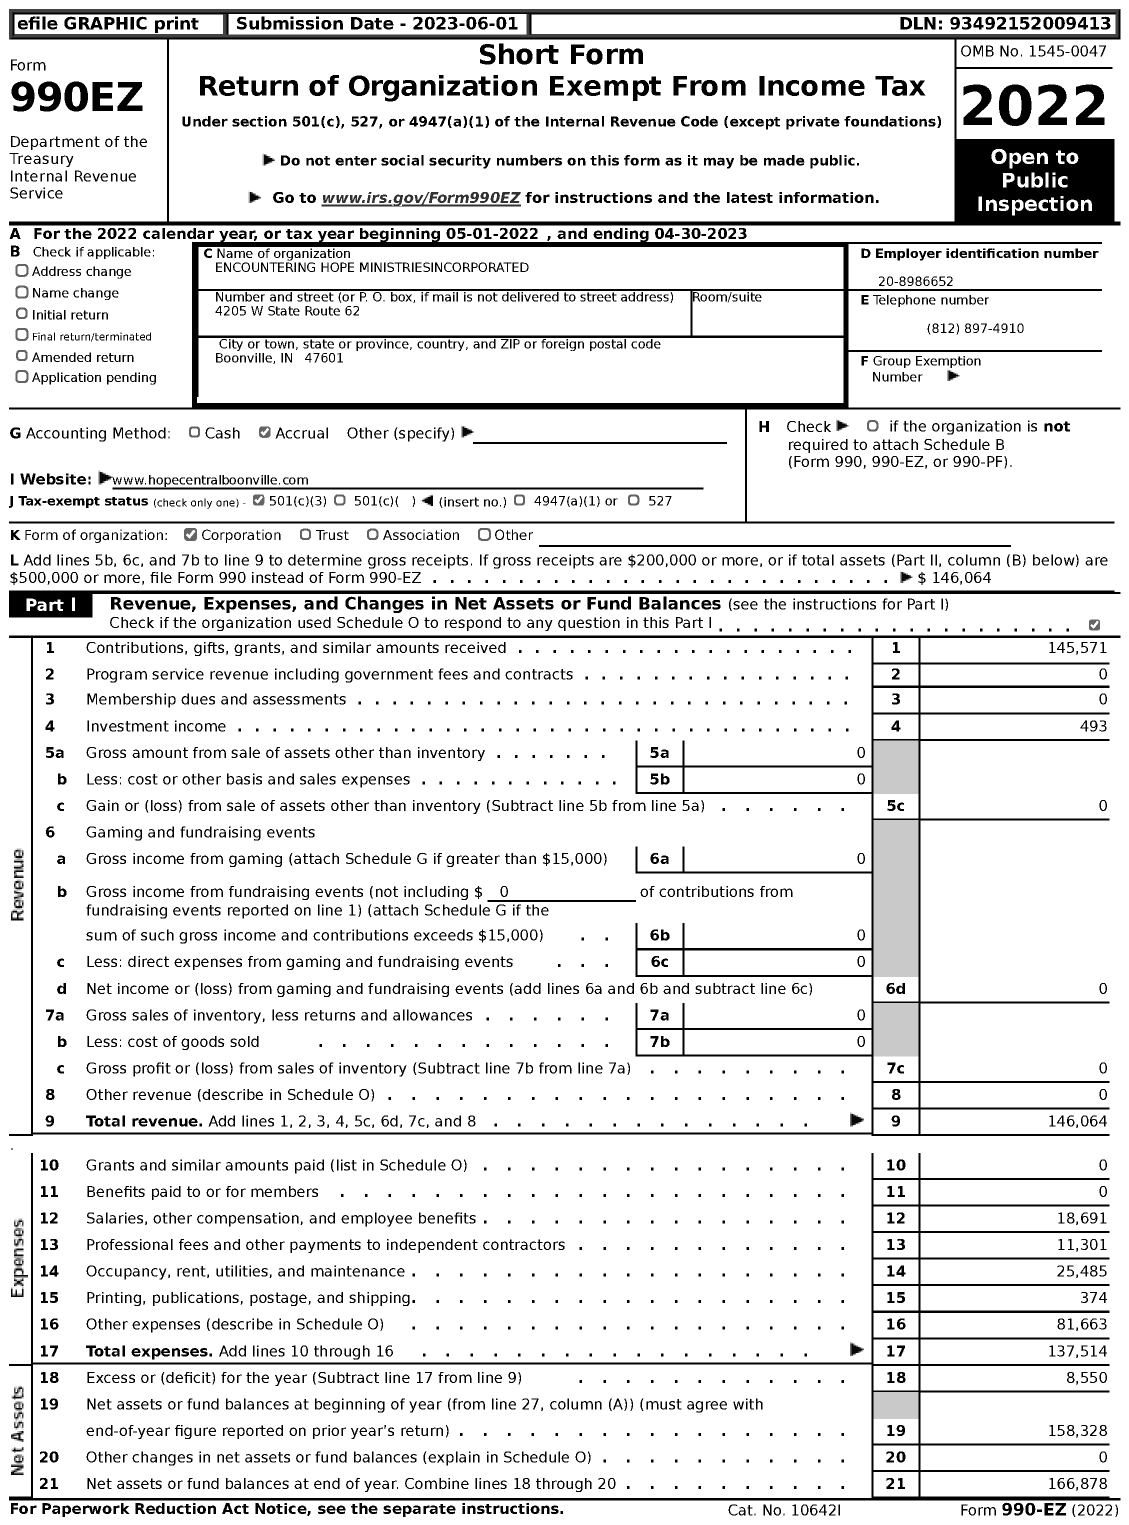 Image of first page of 2022 Form 990EZ for Encountering Hope Ministriesincorporated